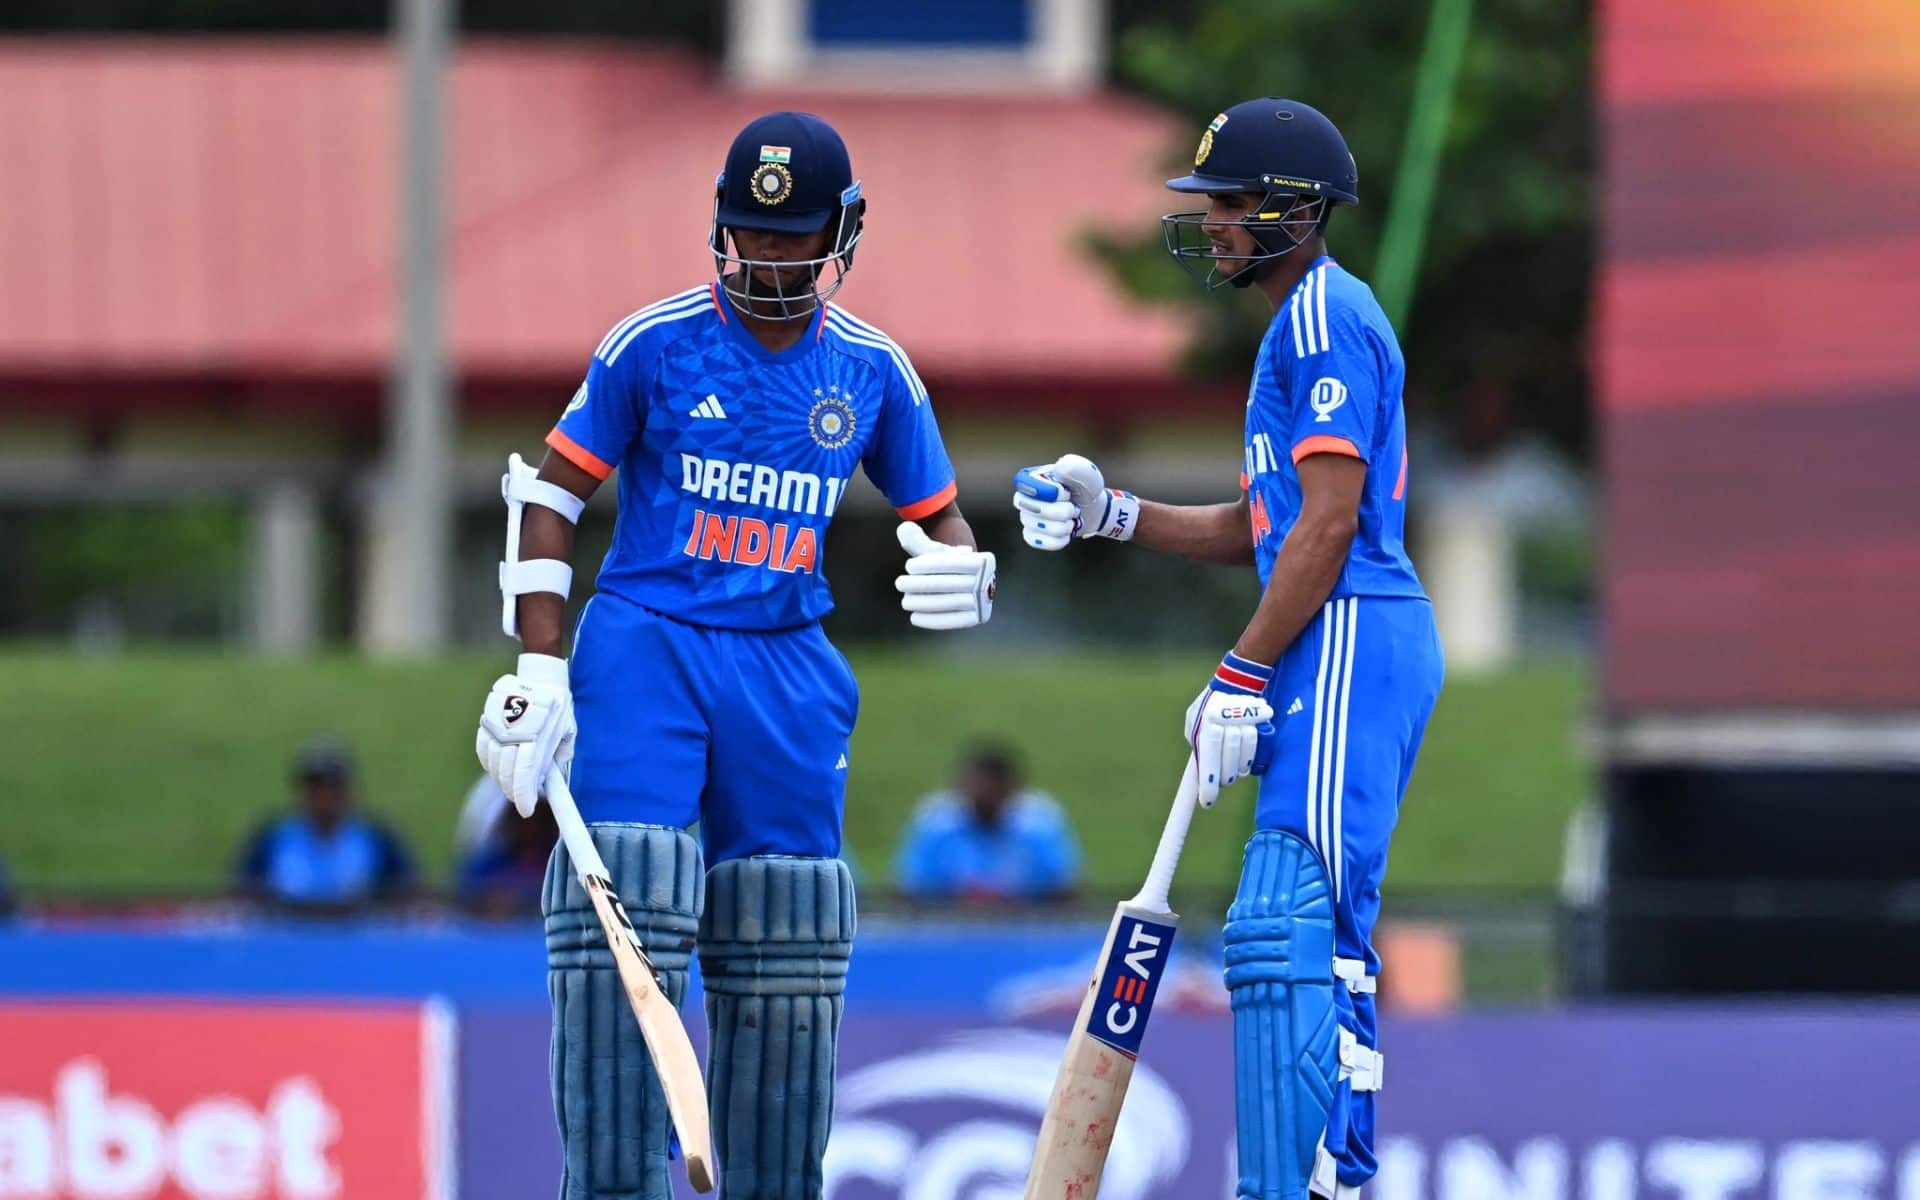 Shubman Gill On Opening With Jaiswal In T20I Cricket: 'We Compliment... Like That About Him'